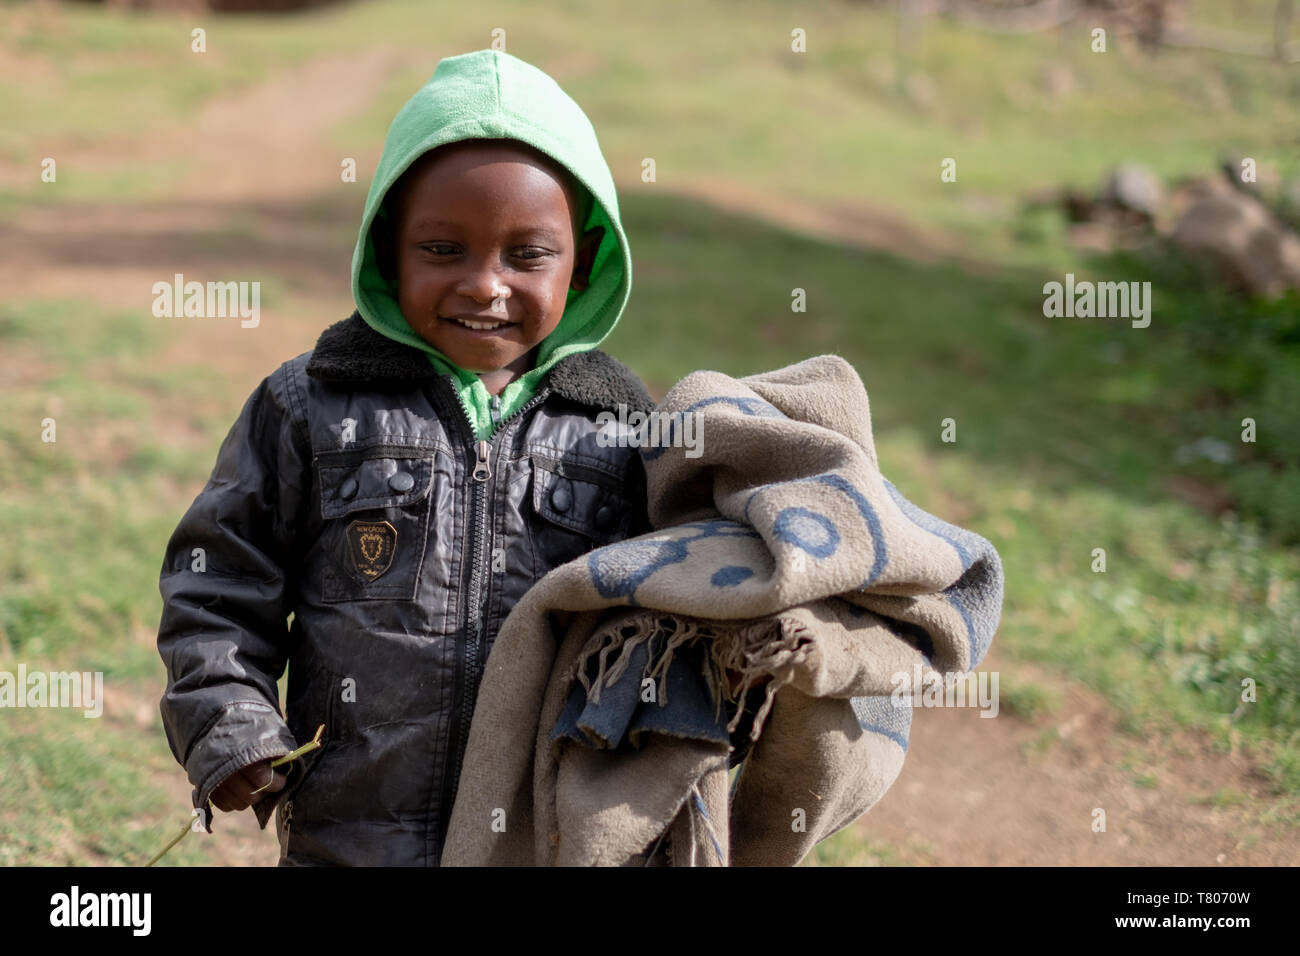 Young boy carrying a blanket in a small village near the town of Mokhotlong in north eastern Lesotho, Africa. Stock Photo